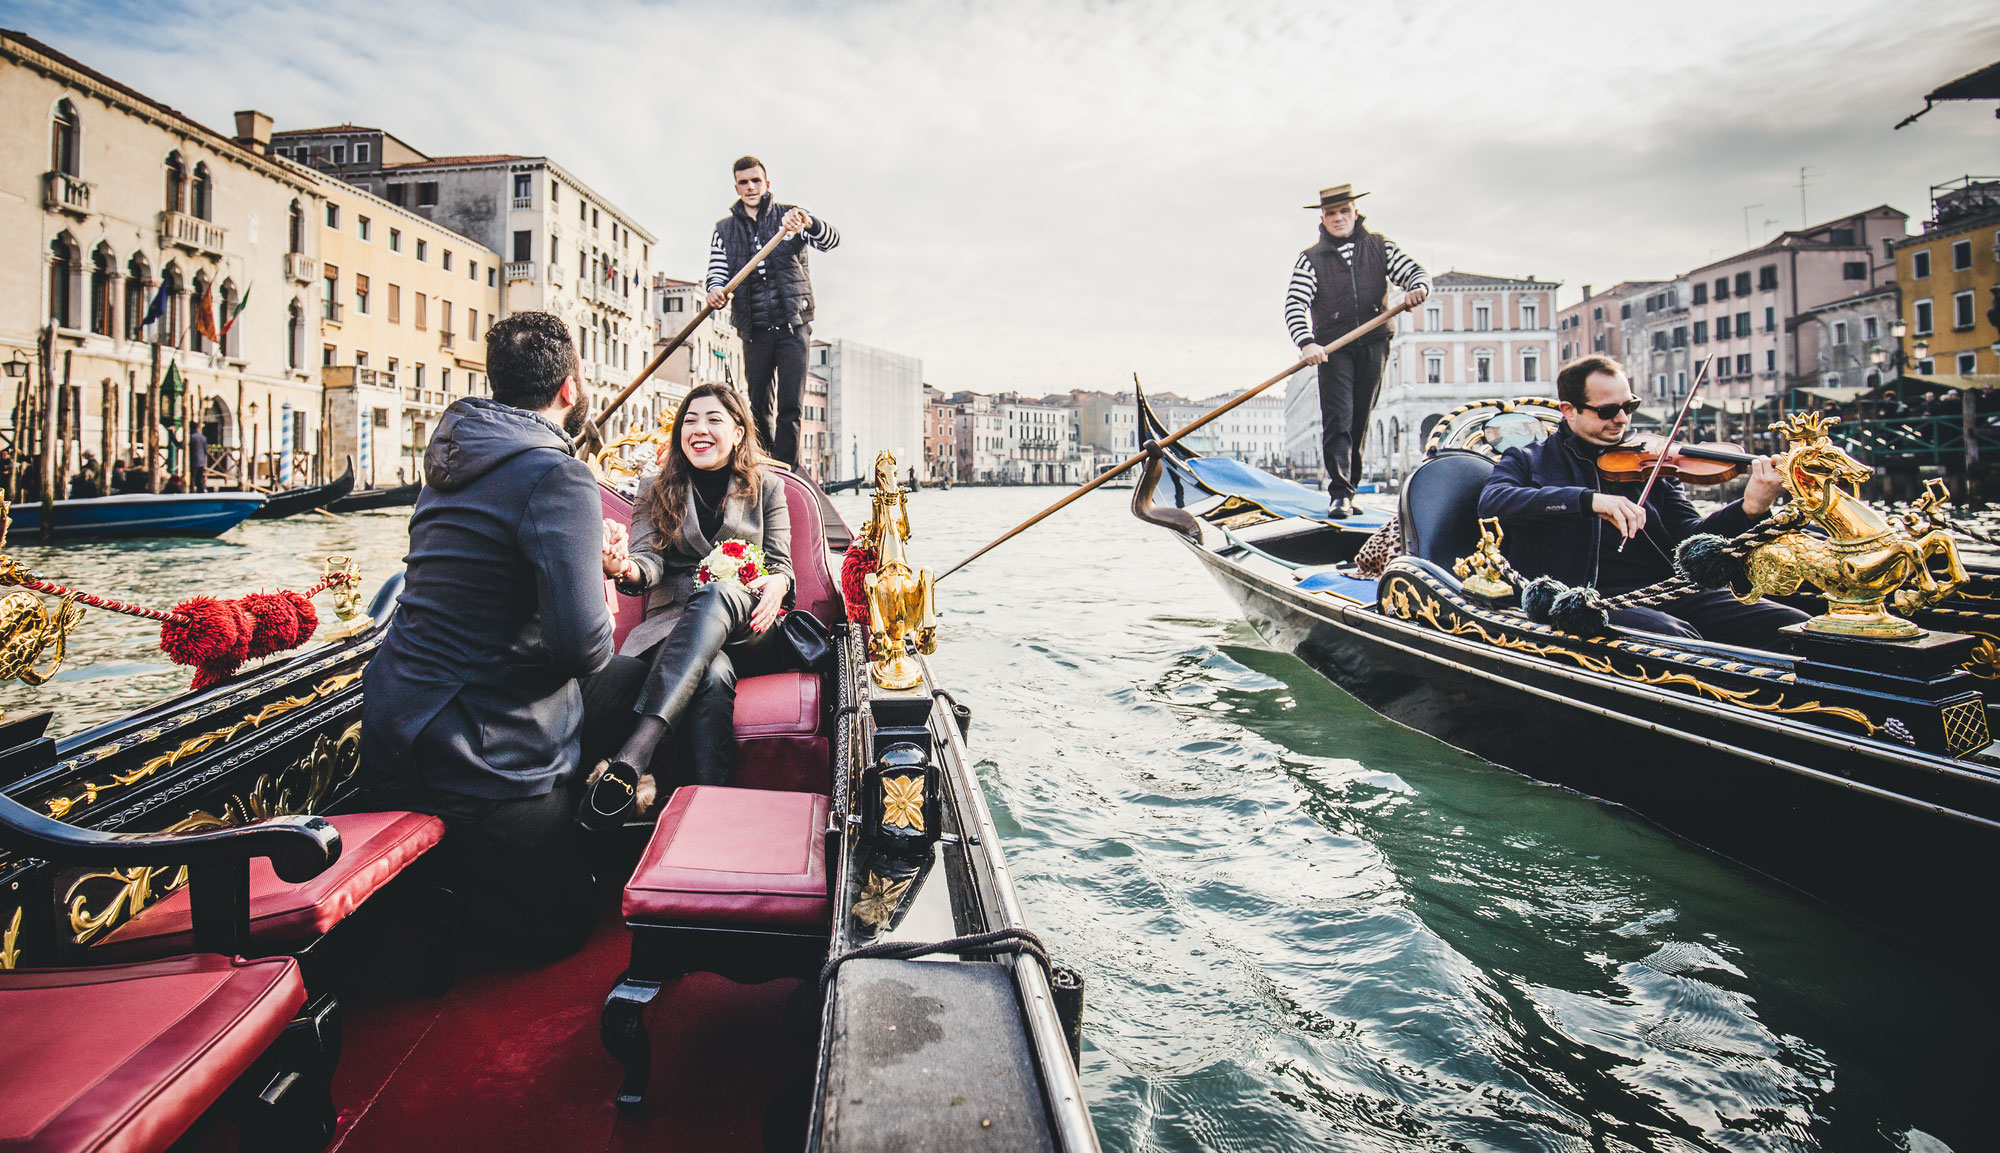 A unique Wedding Proposal on the Gran Canal